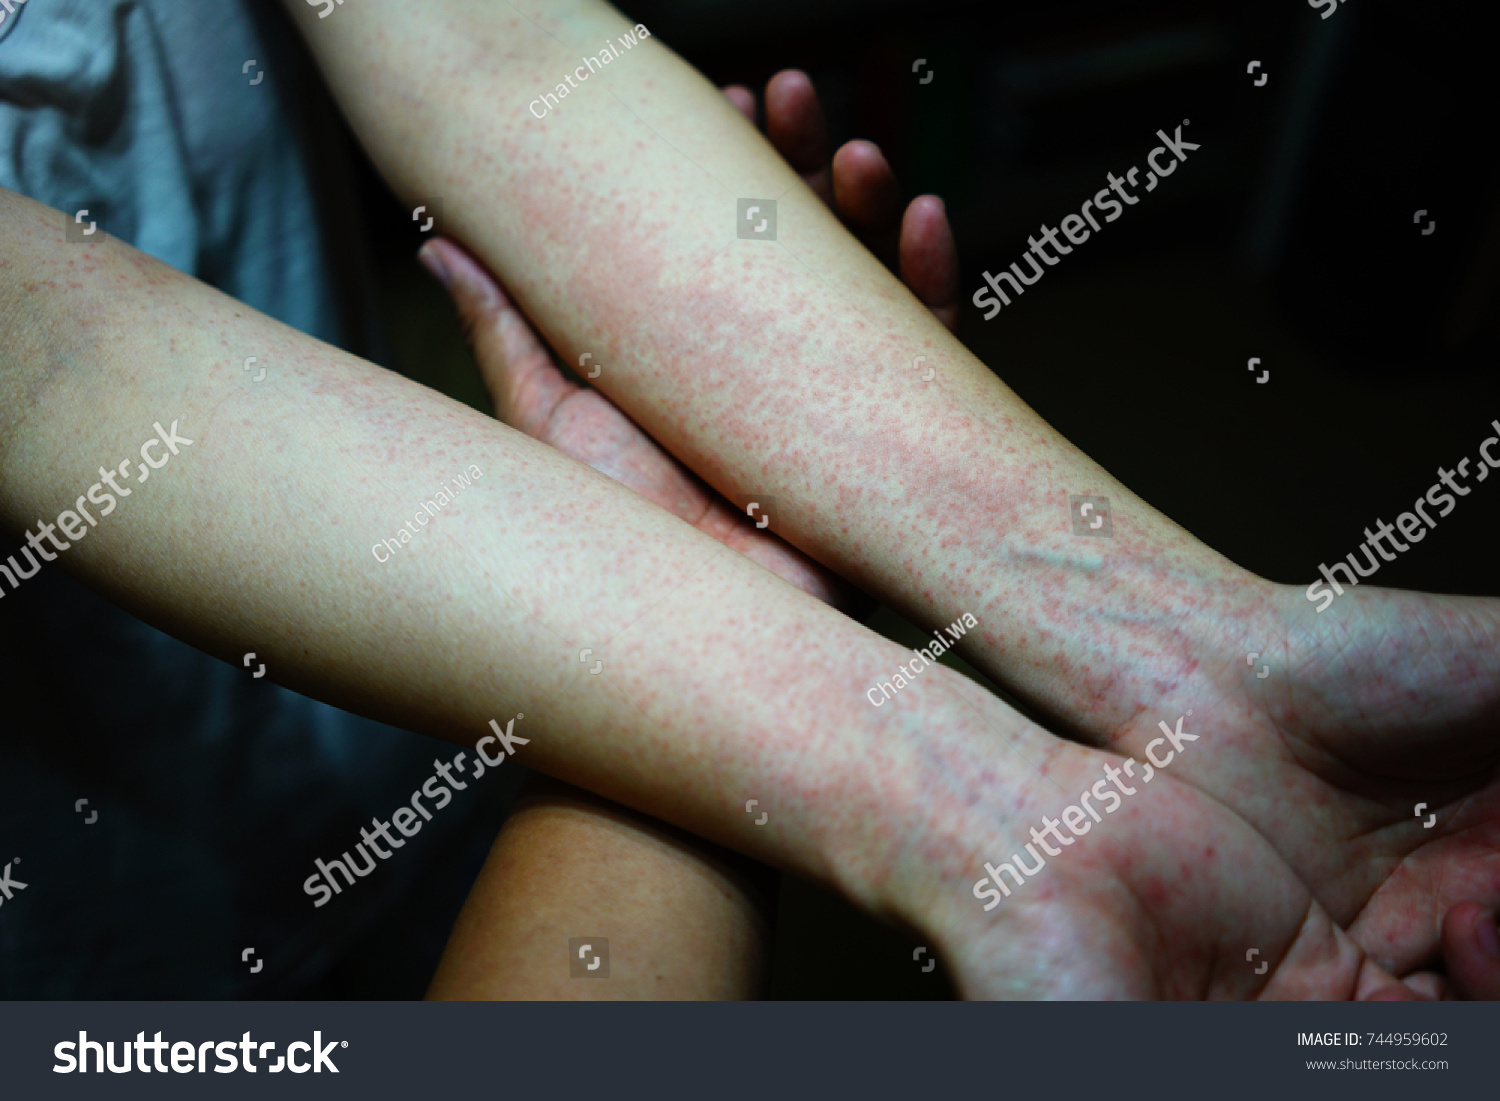 Urticaria Hives On Forearms Itchy Bumps Education Stock Image